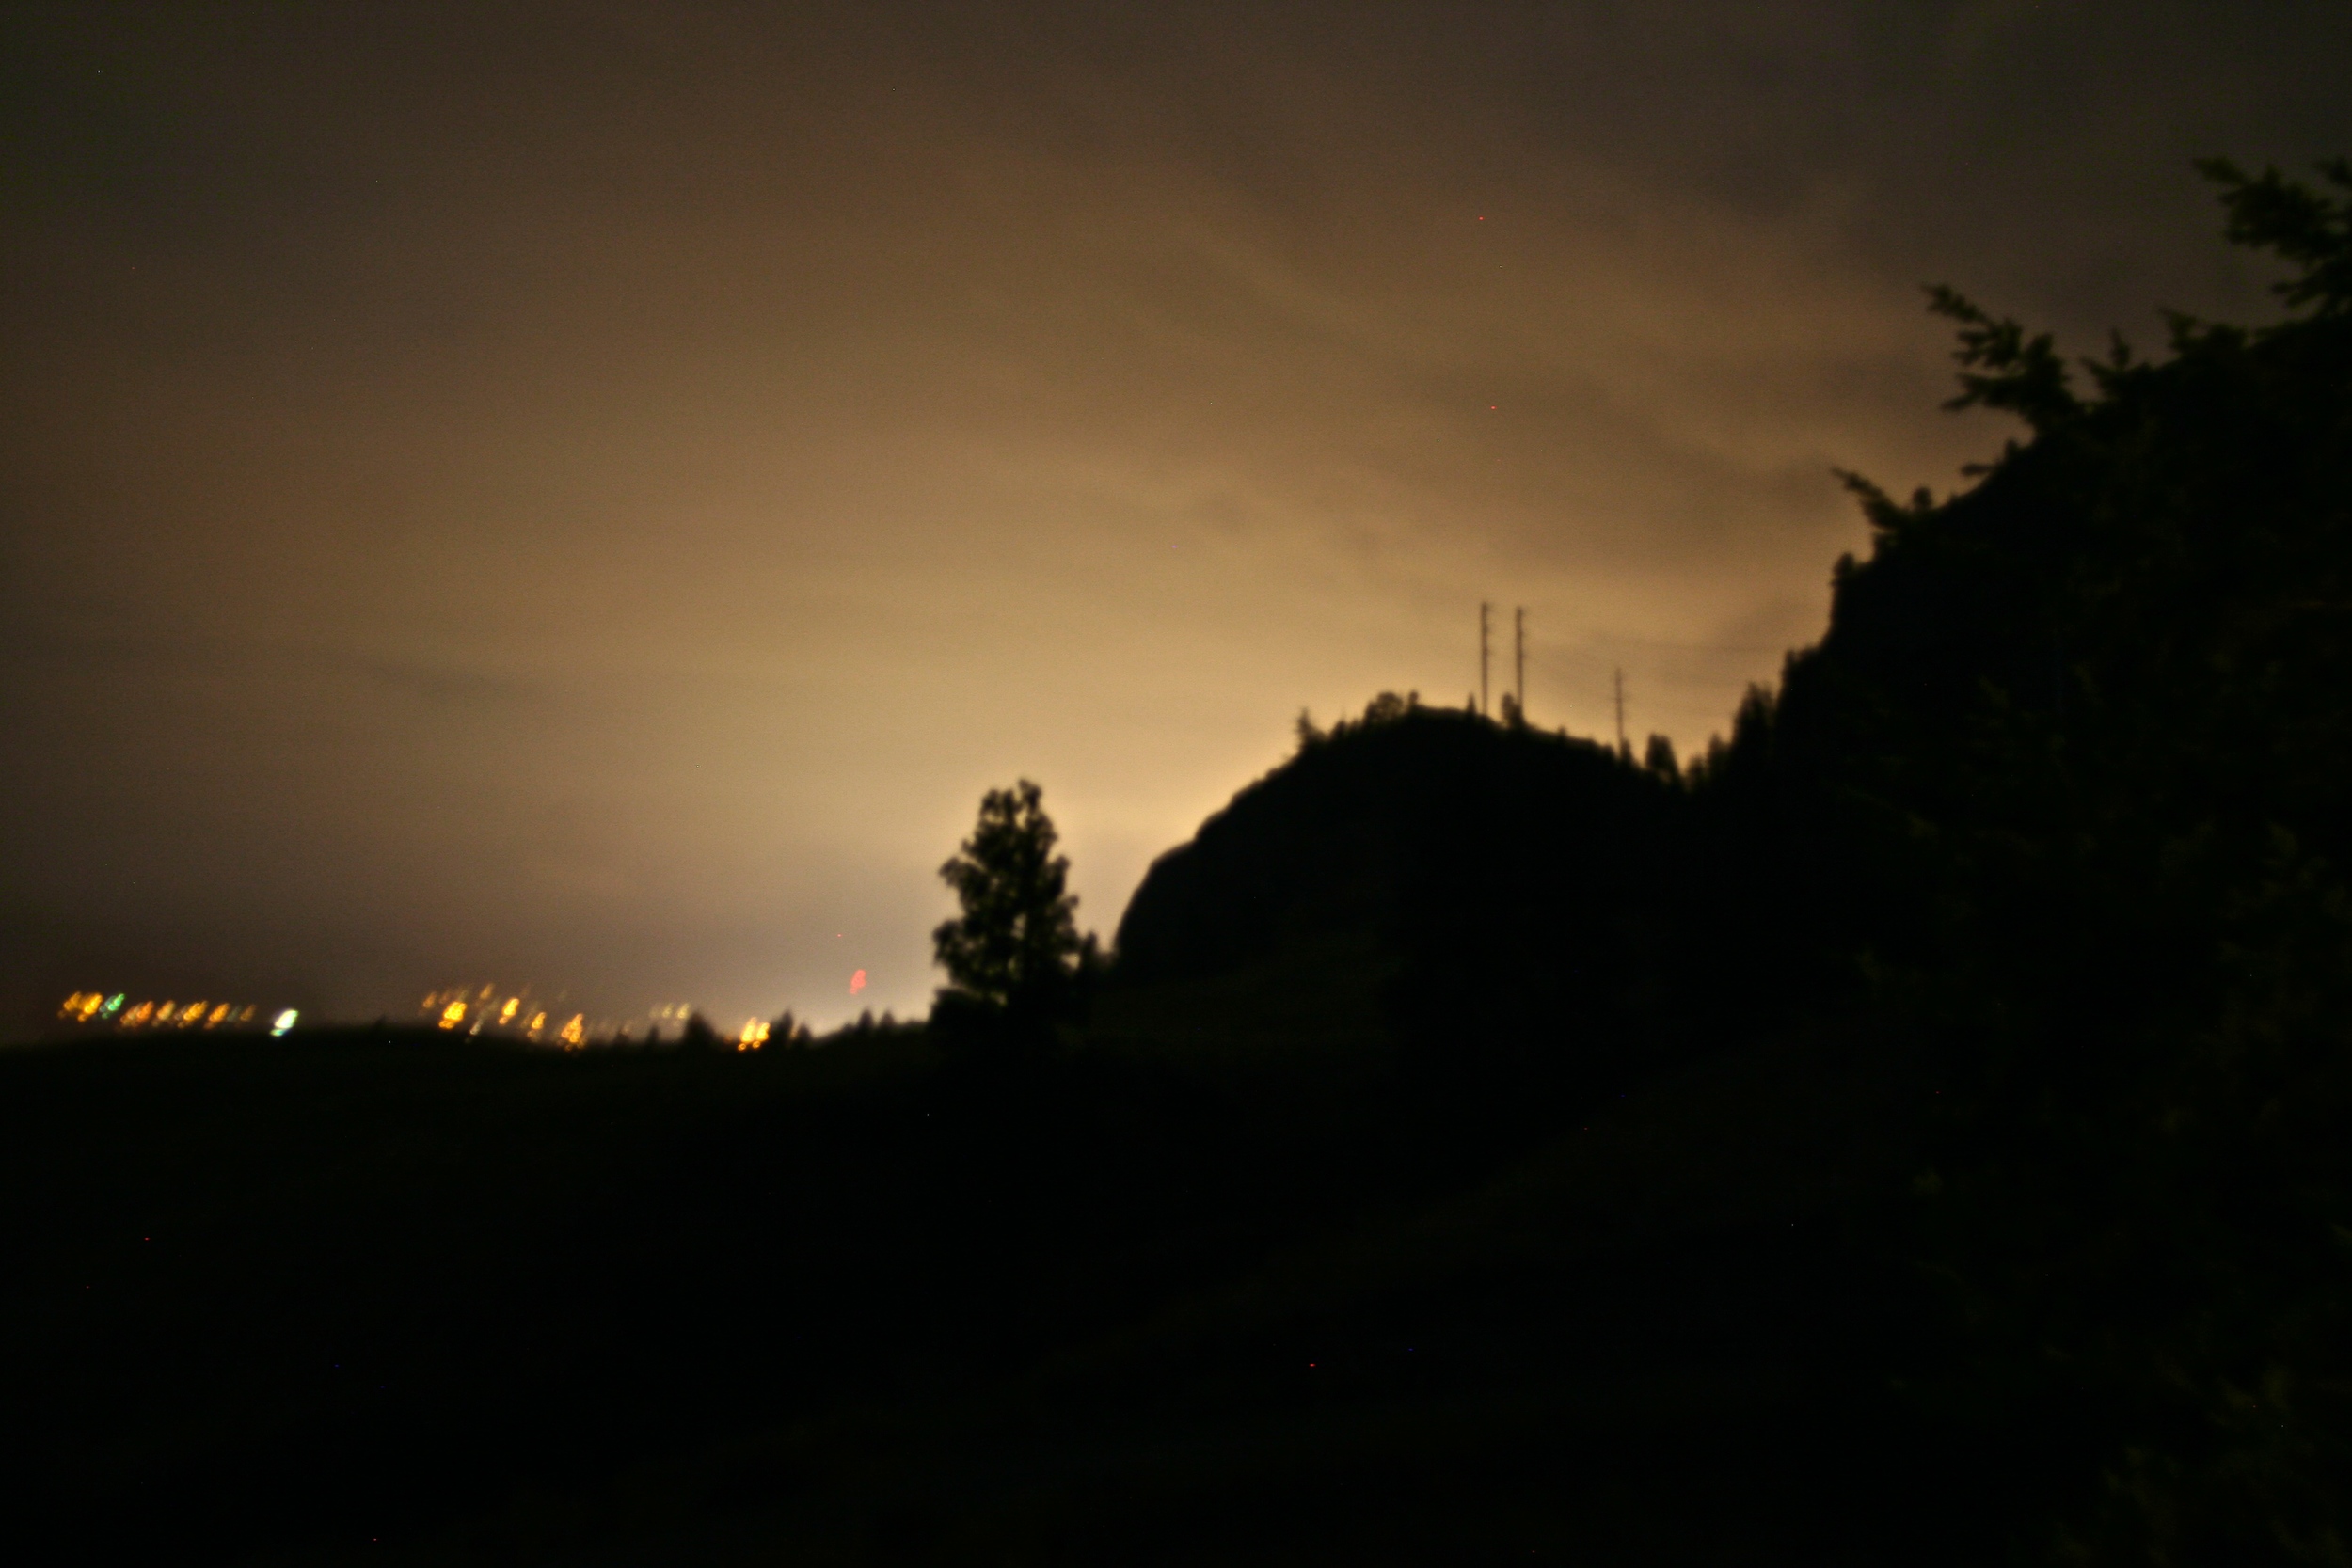  The evening lights of Penticton shining over the Bluffs at the winery. 